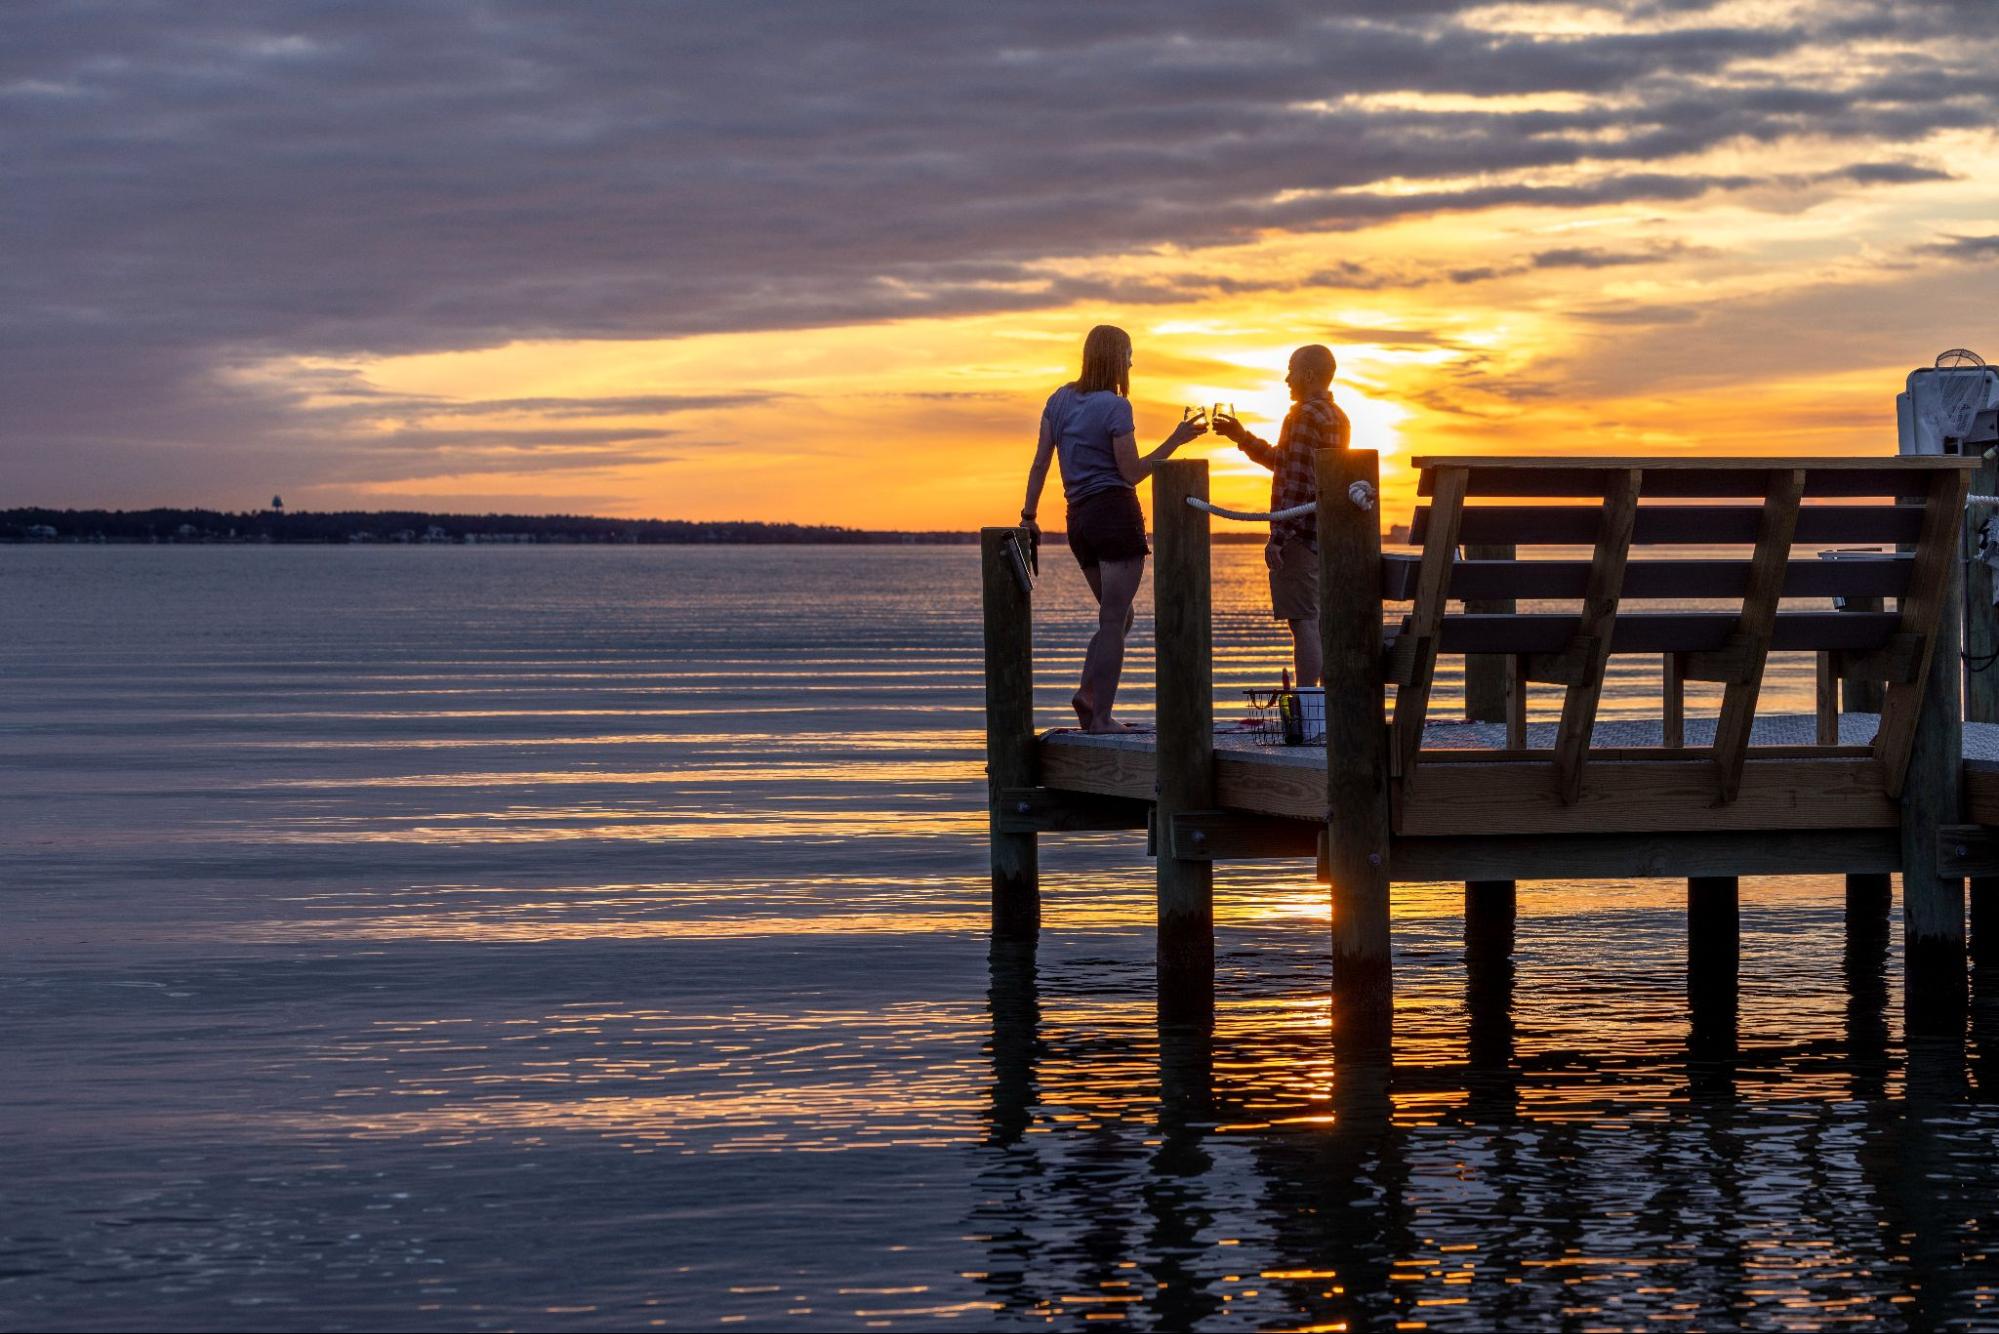 Two people cheersing at the end of a dock at sunset.